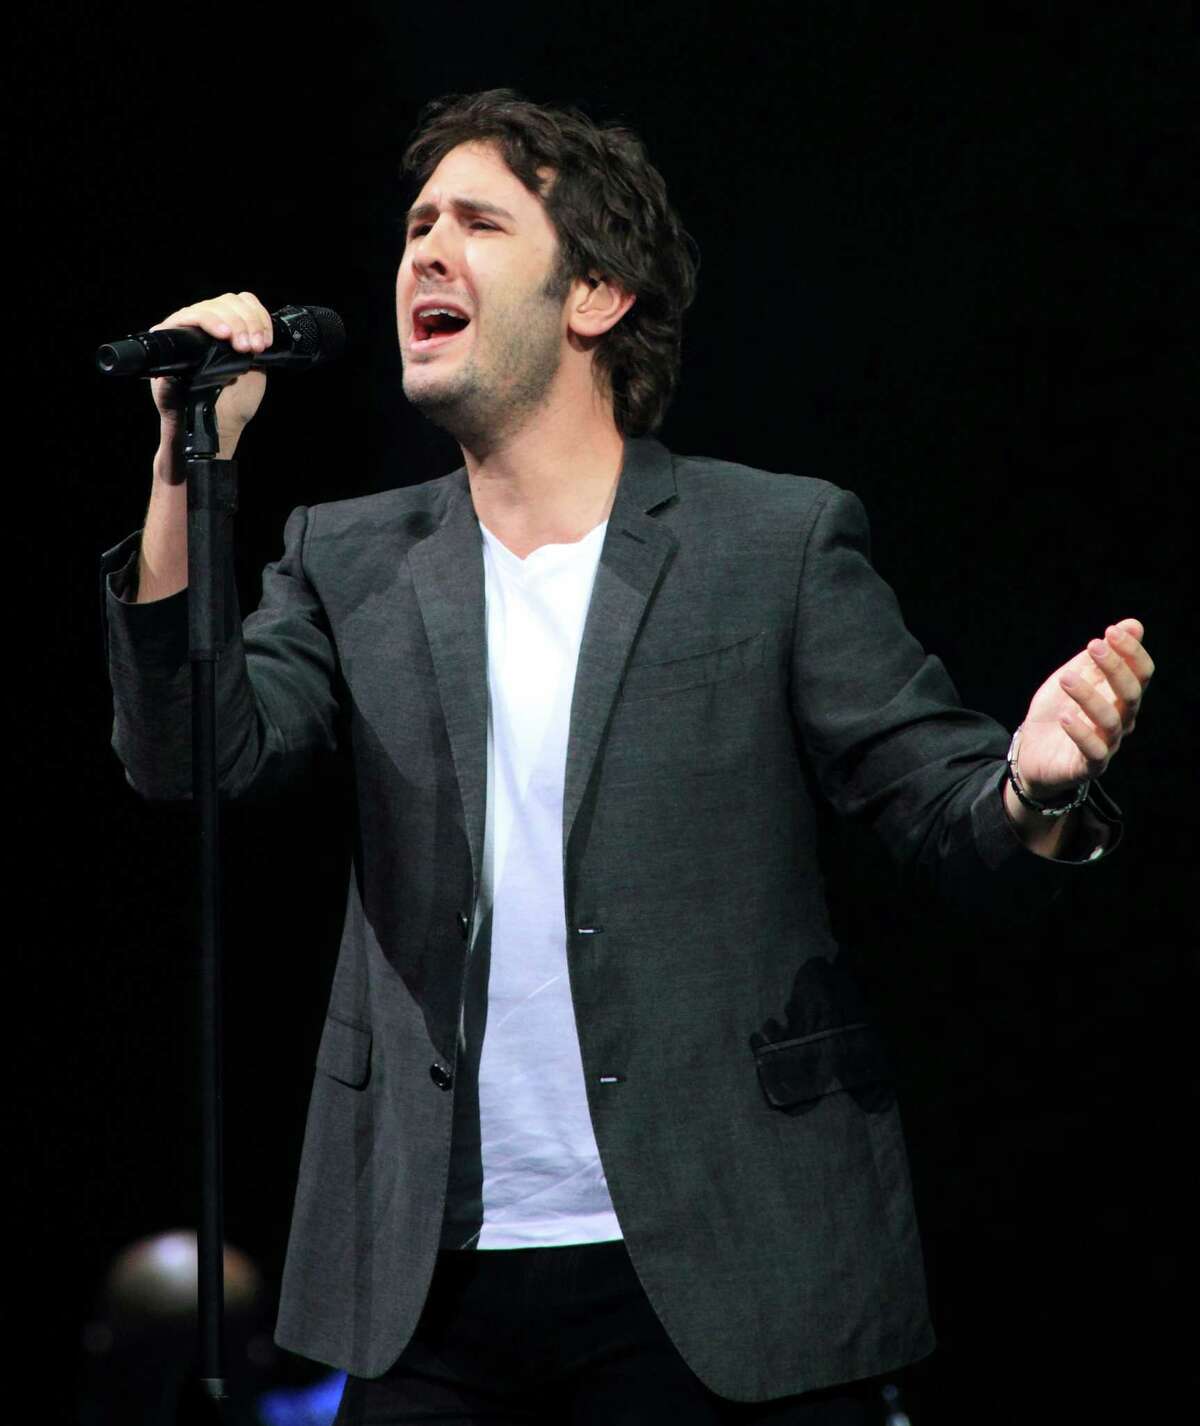 Josh Groban, Monica Lewinsky and Cat Cora were among the celebrity contributors to Lisa Erspamer’s “A Letter to My Mom,” Crown Archetype. FILE - In this Nov. 2, 2013 file photo, singer songwriter Josh Groban performs in concert at the Wells Fargo Center in Philadelphia. Groban is a contributor to a Mothers Day book of letters put together by Lisa Erspamer. The former TV executive and a team from her Los Angeles production company decided on 64 letters balanced between everyday sons and daughters and celebrities. (Photo by Owen Sweeney/Invision/AP)